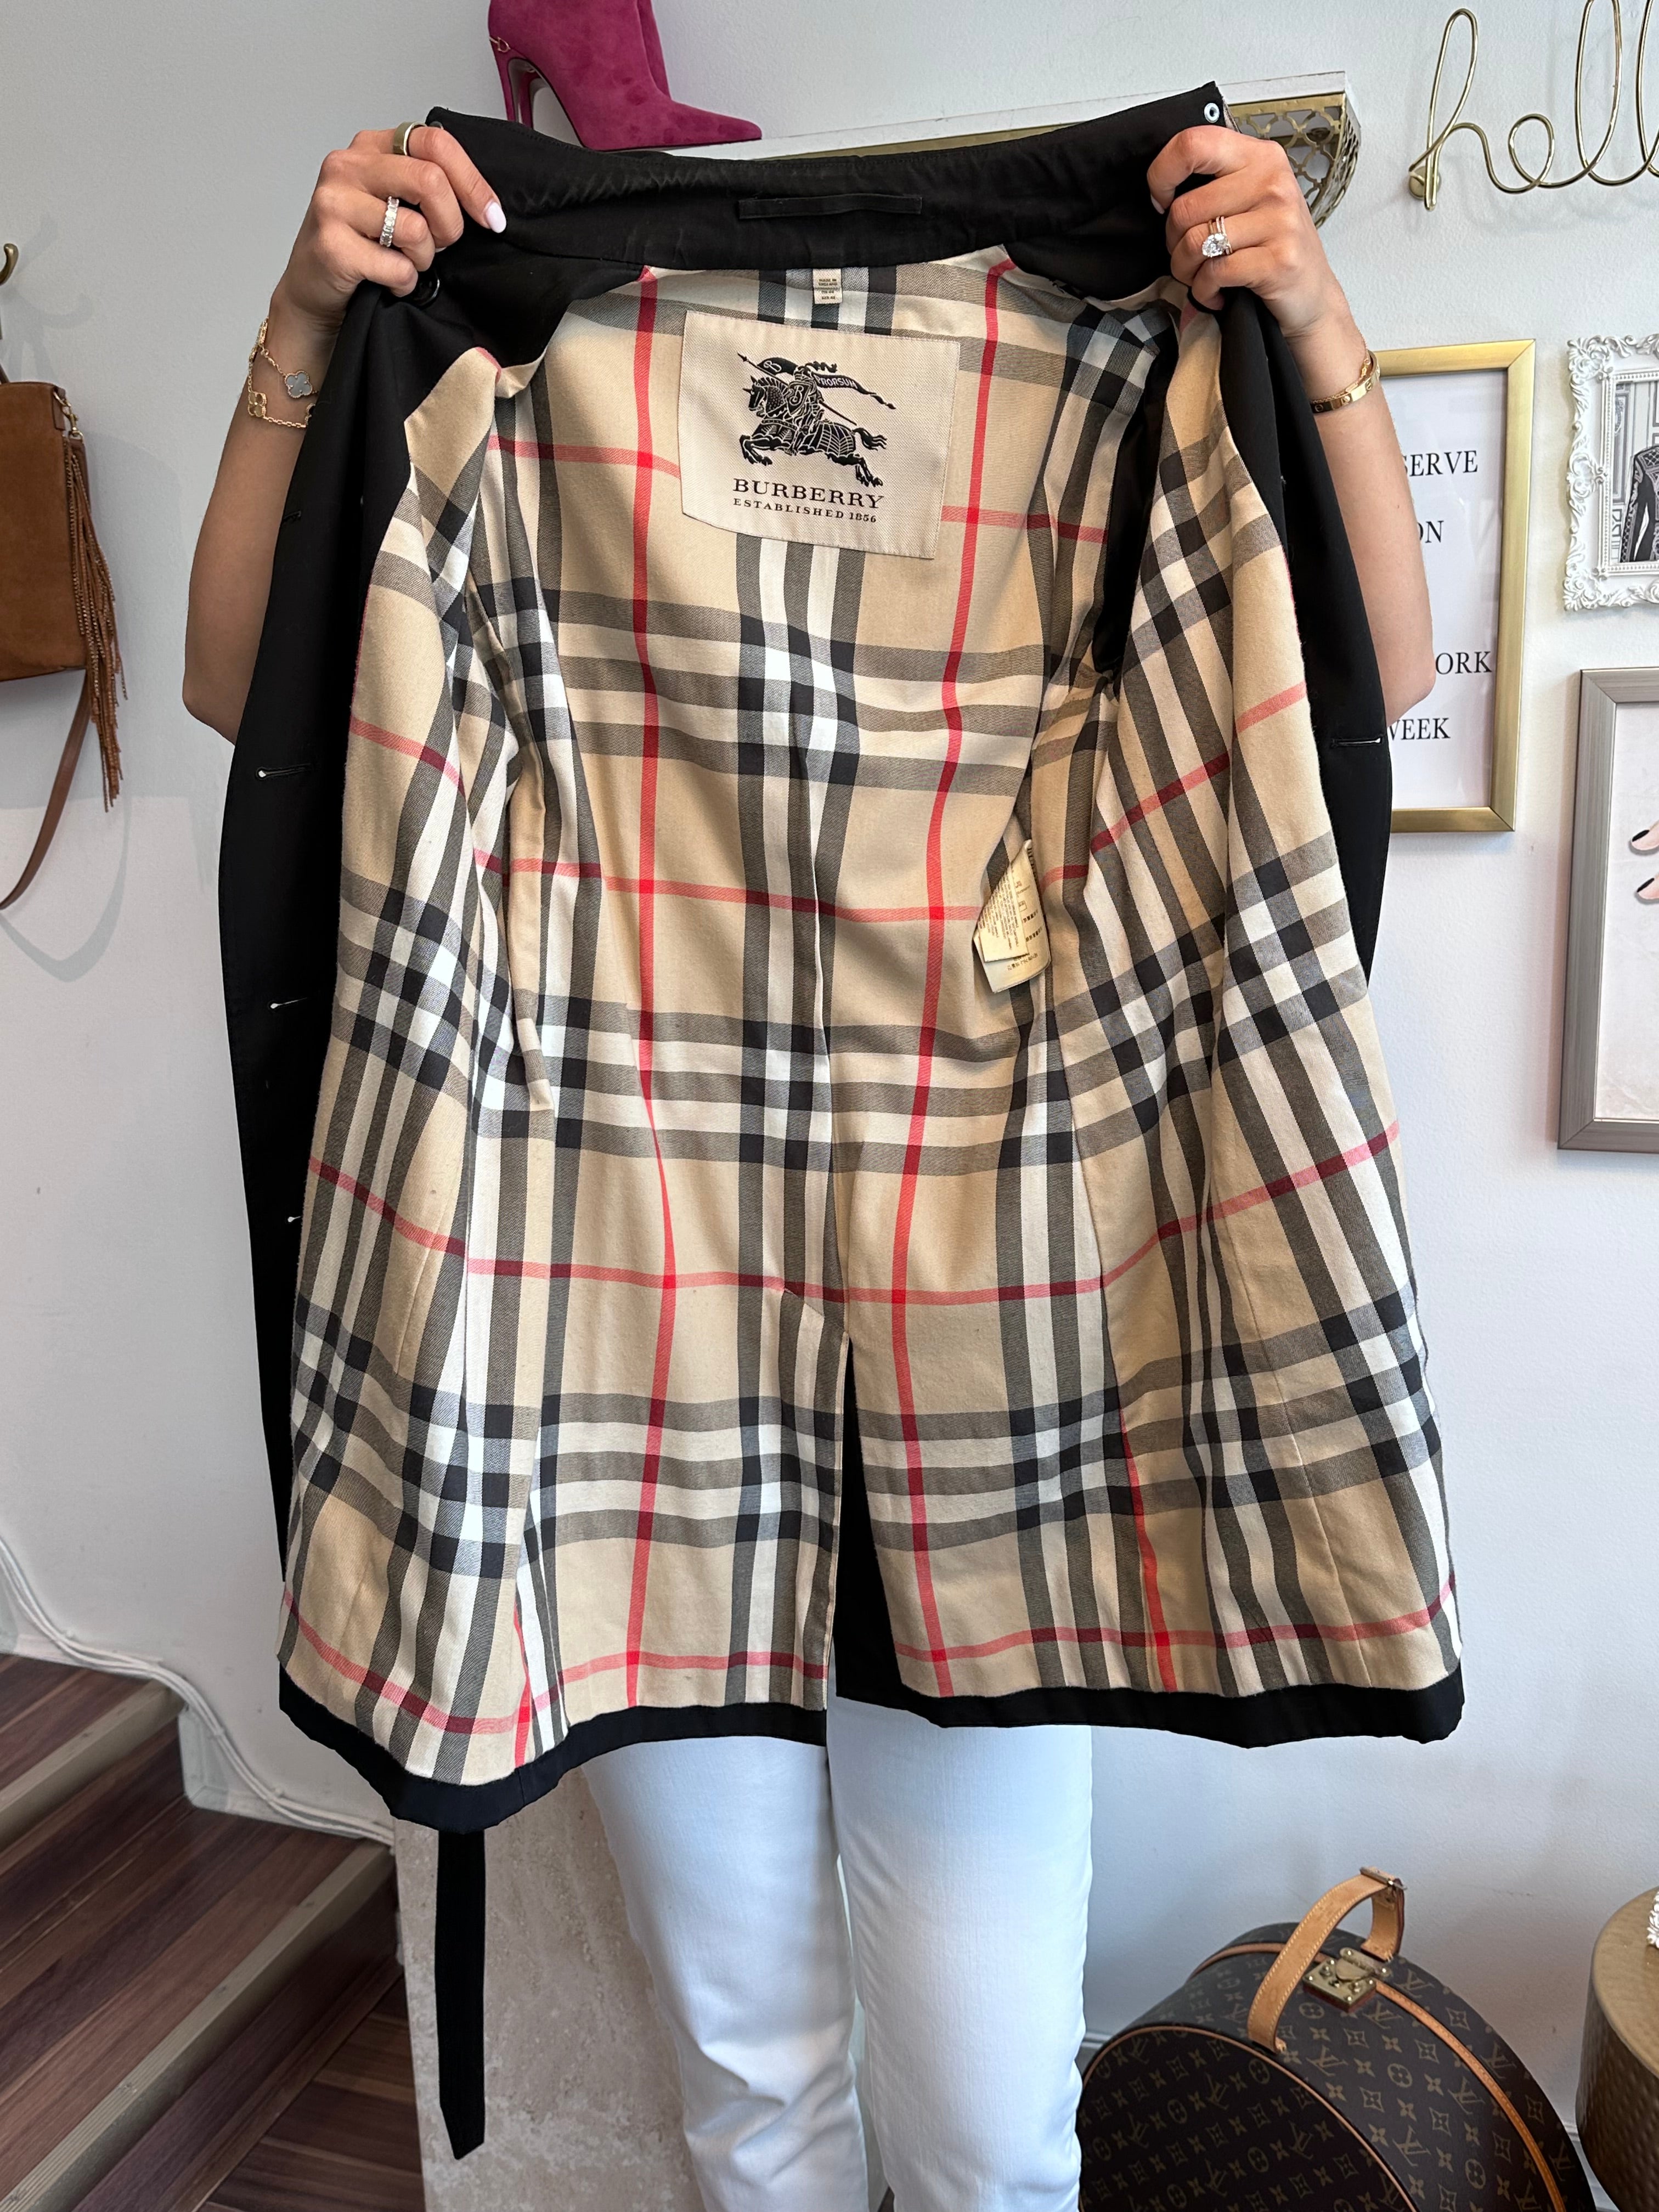 Pre-Owned BURBERRY Short Black Trench Coat